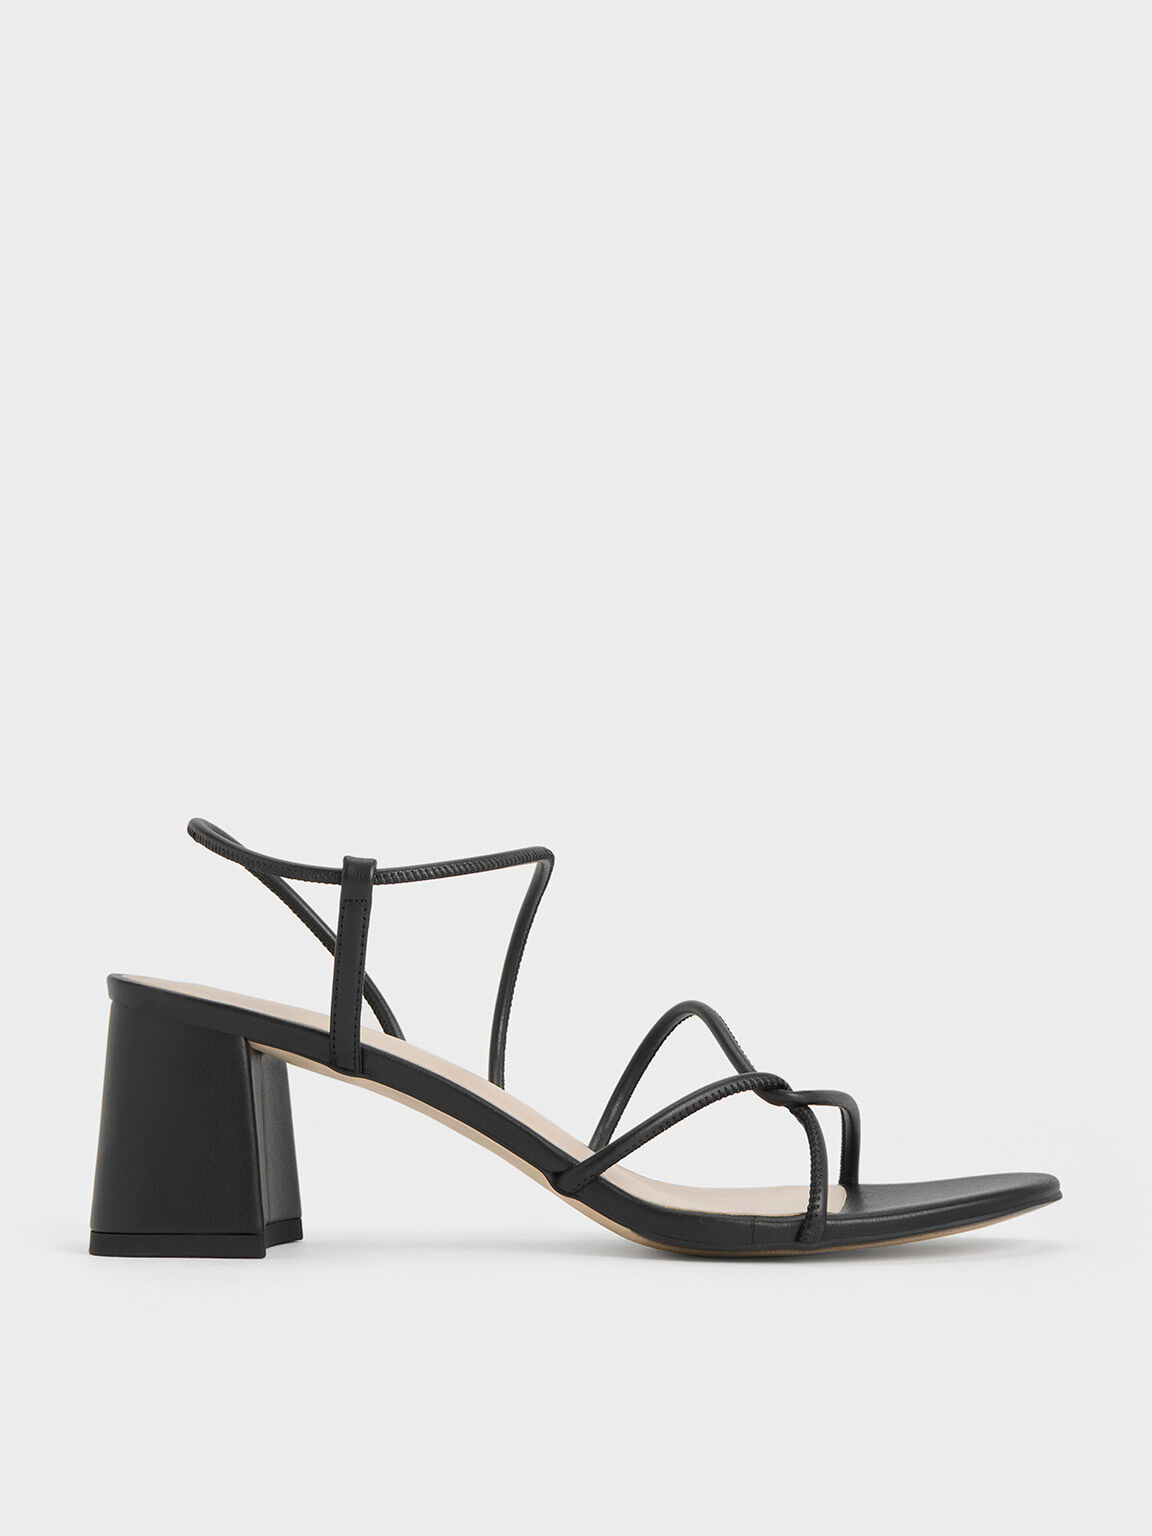 Charles & Keith thin strap mid heeled sandals in black | ASOS